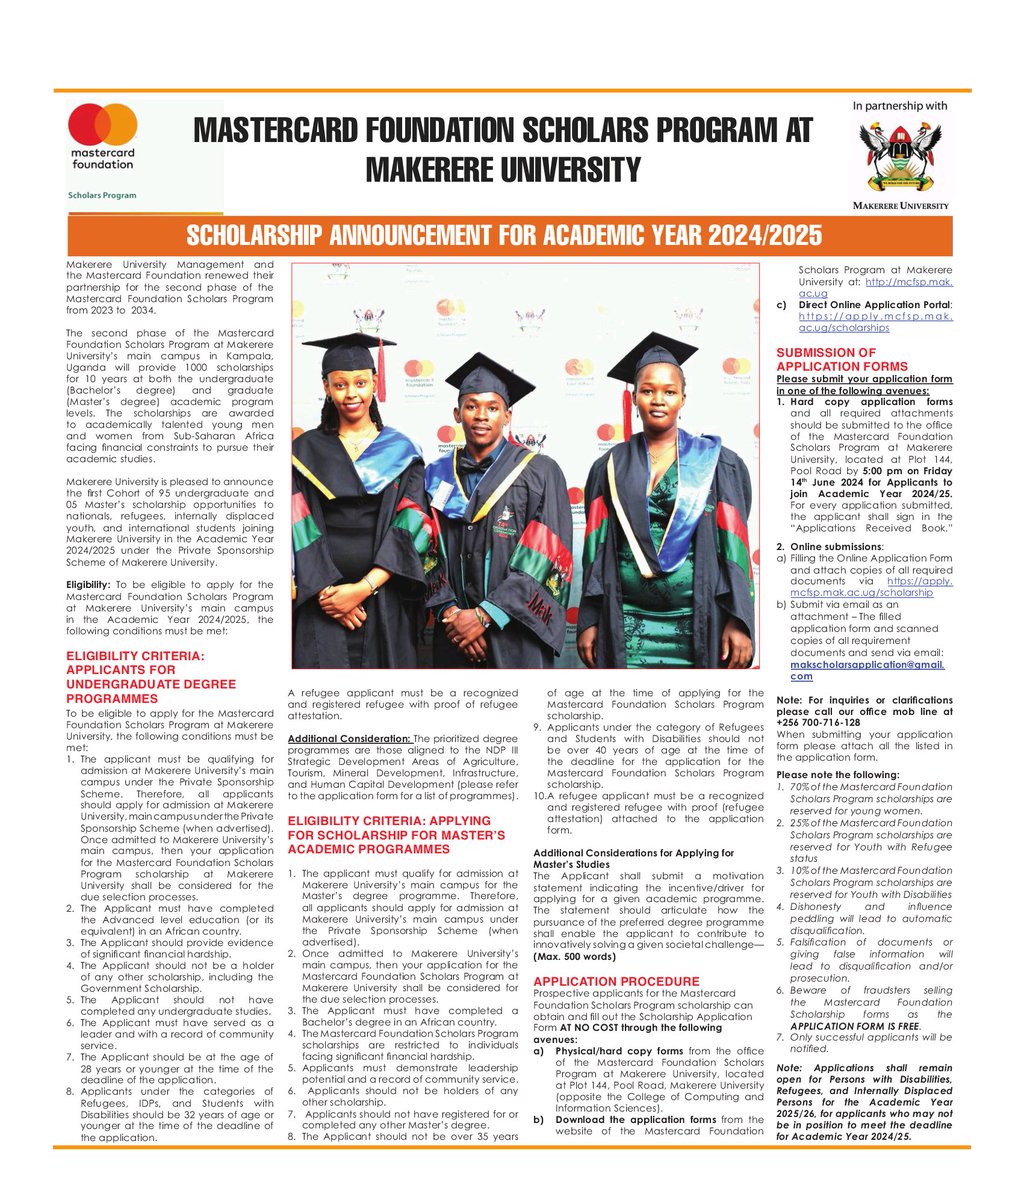 .@MCFMakerere in partnership with @Makerere have a number of scholarship opportunities for undergraduate and masters students for the academic year 2024/2025. Please read through this announcement to understand the eligibilty criteria and how you can apply. Good luck 🤞